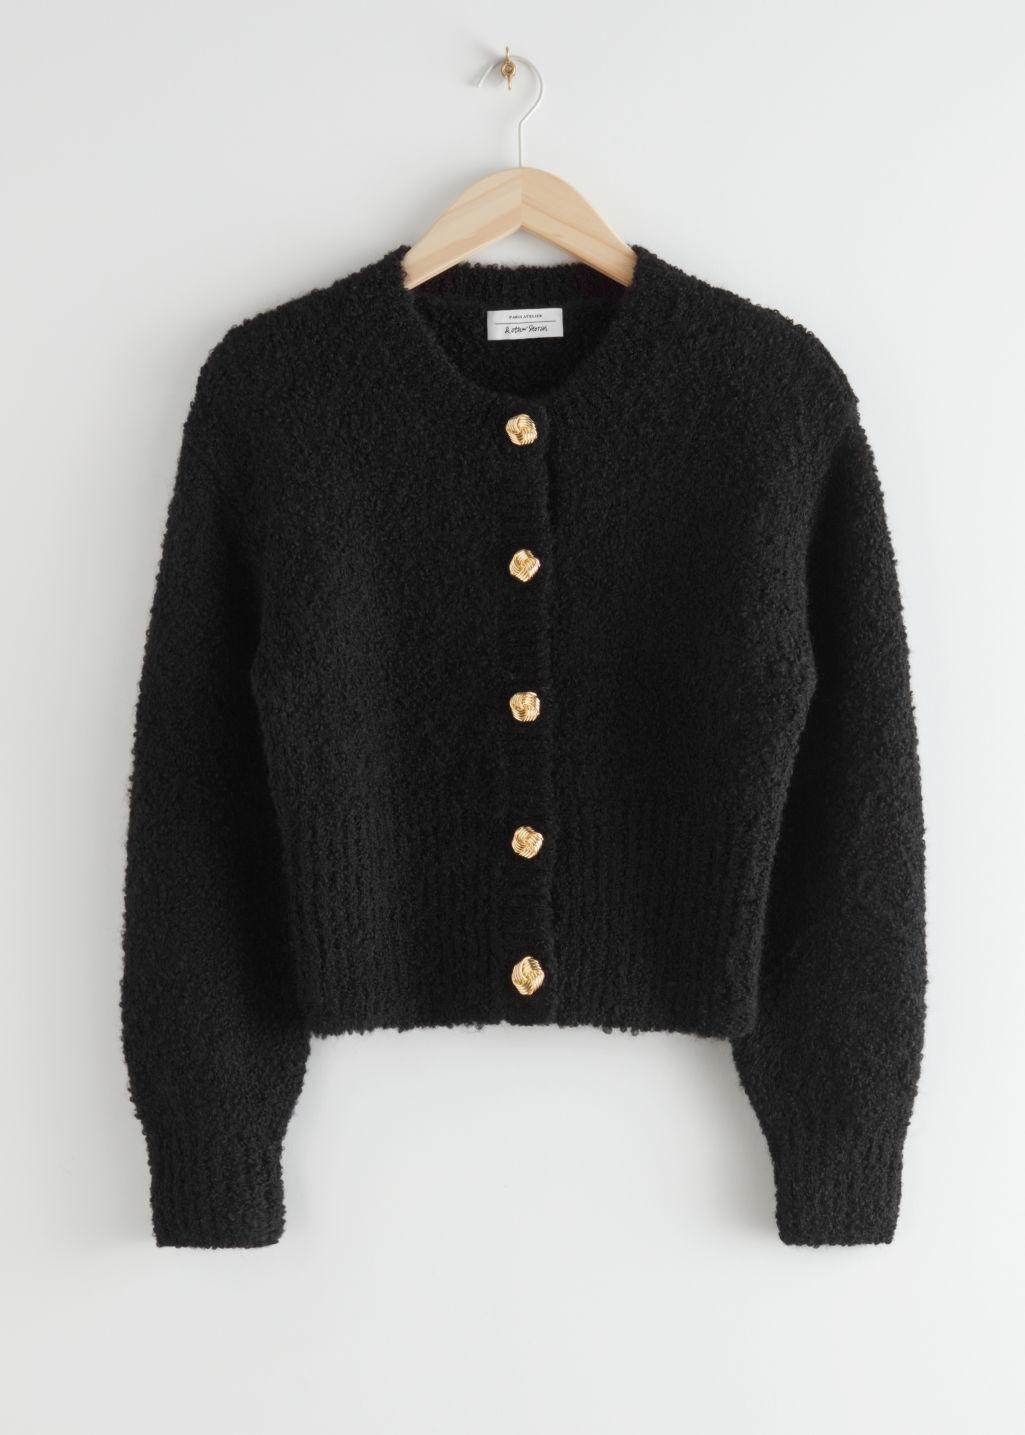 & Other Stories Bouclé Knit Cropped Cardigan in Black - Lyst